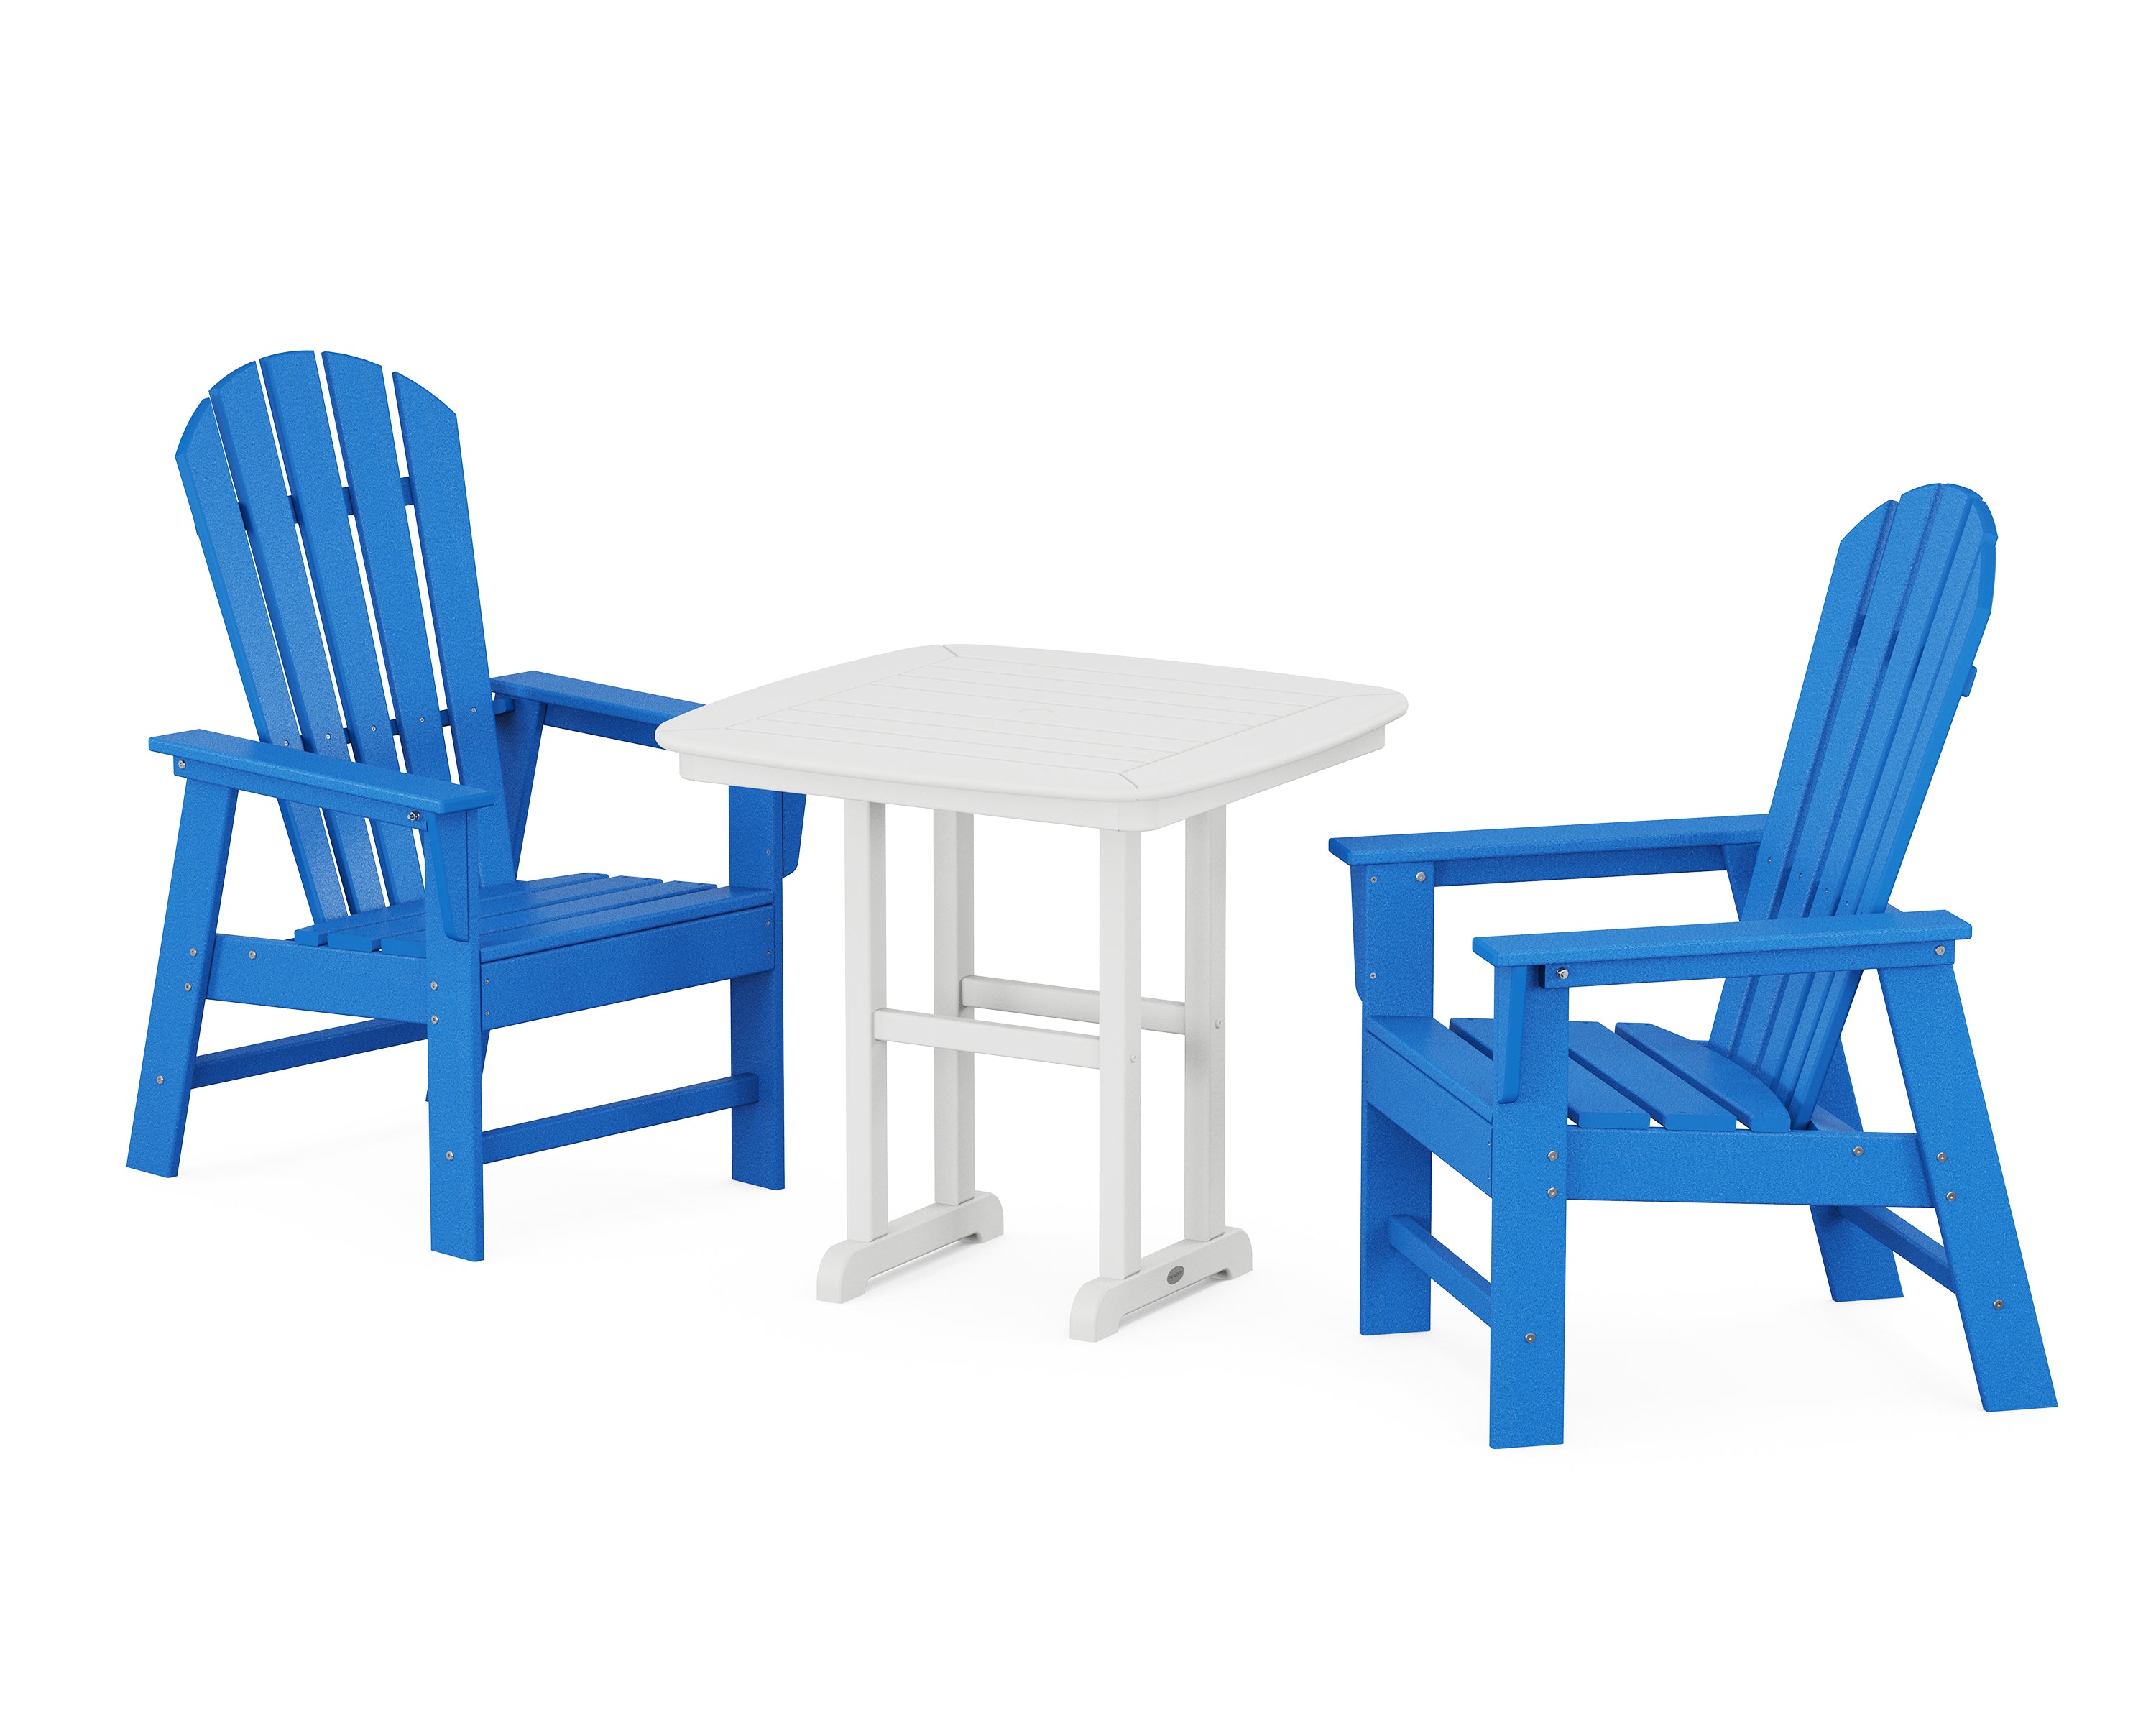 POLYWOOD® South Beach 3-Piece Dining Set in Pacific Blue / White